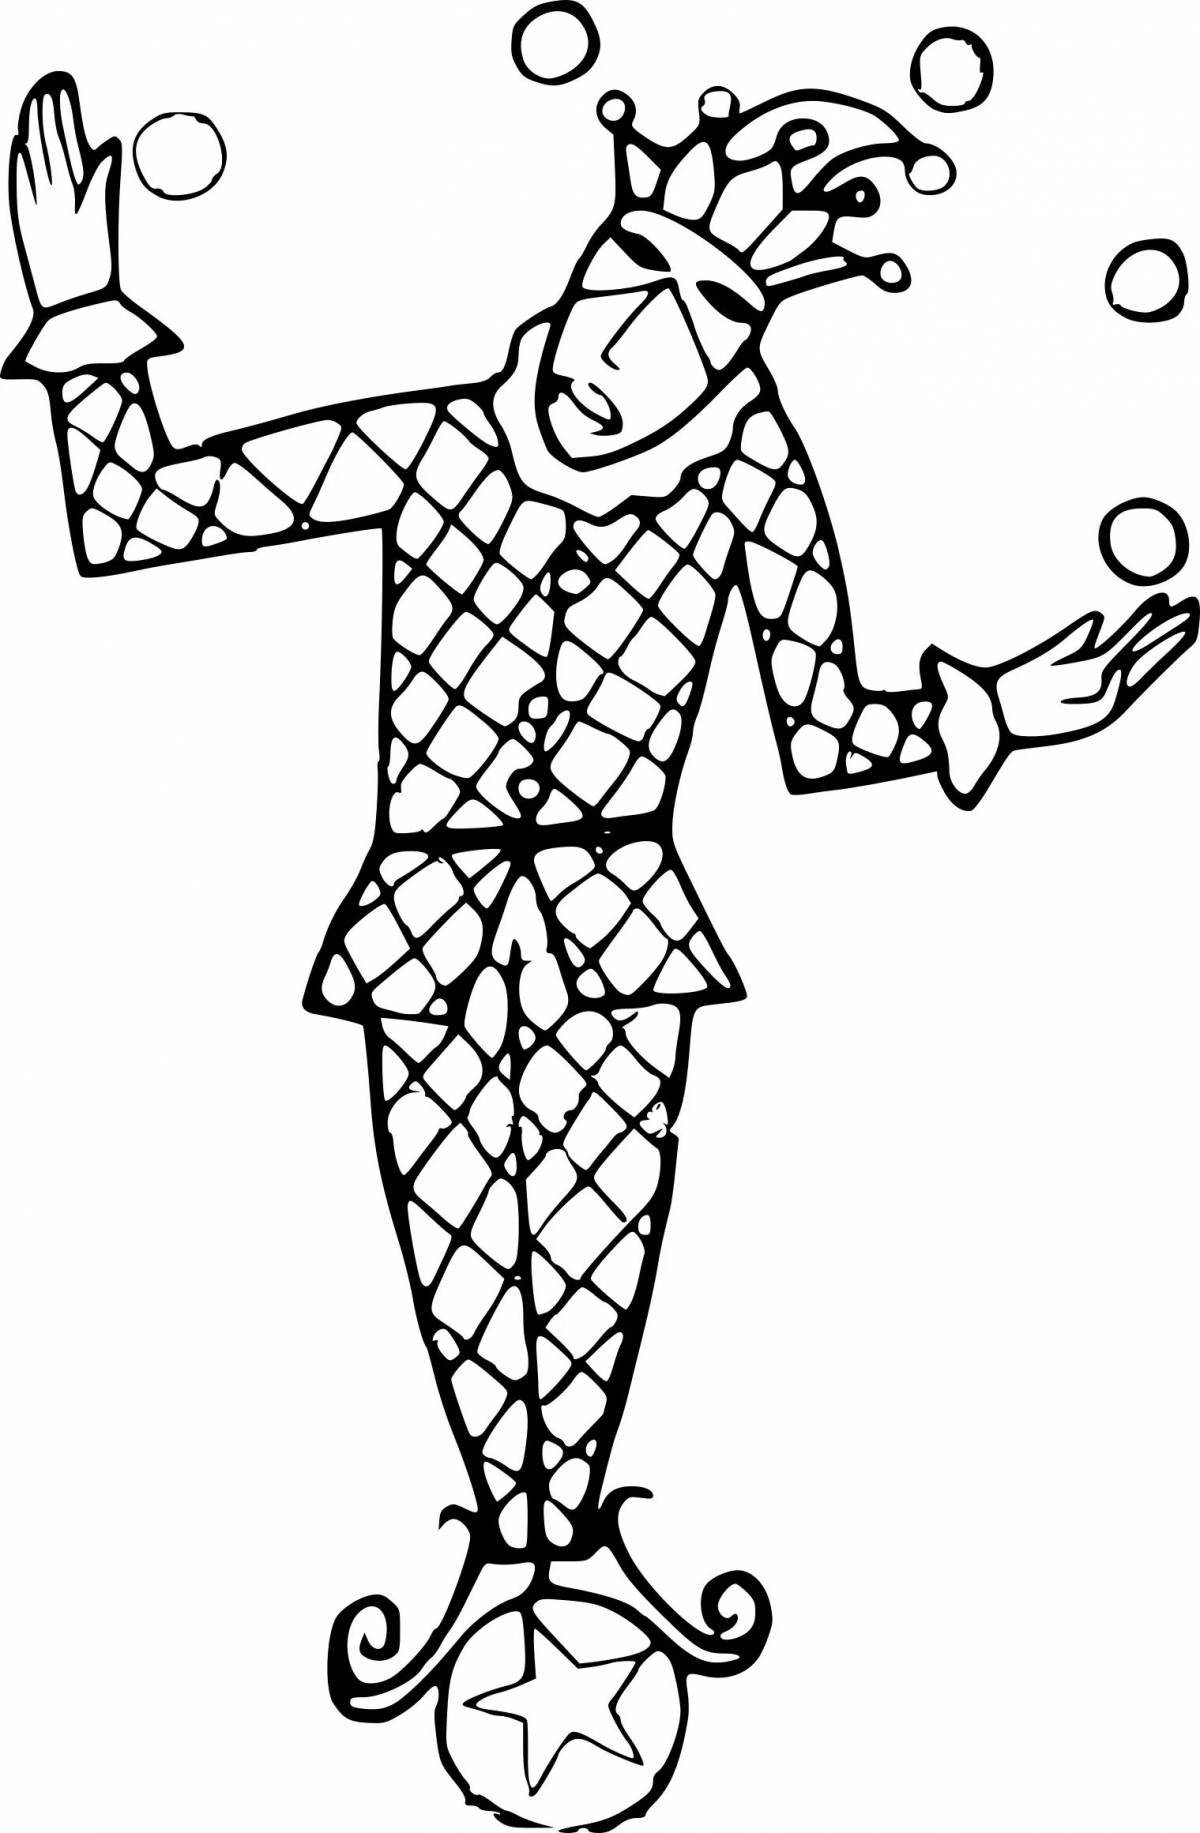 Coloring page shiny theatrical costume